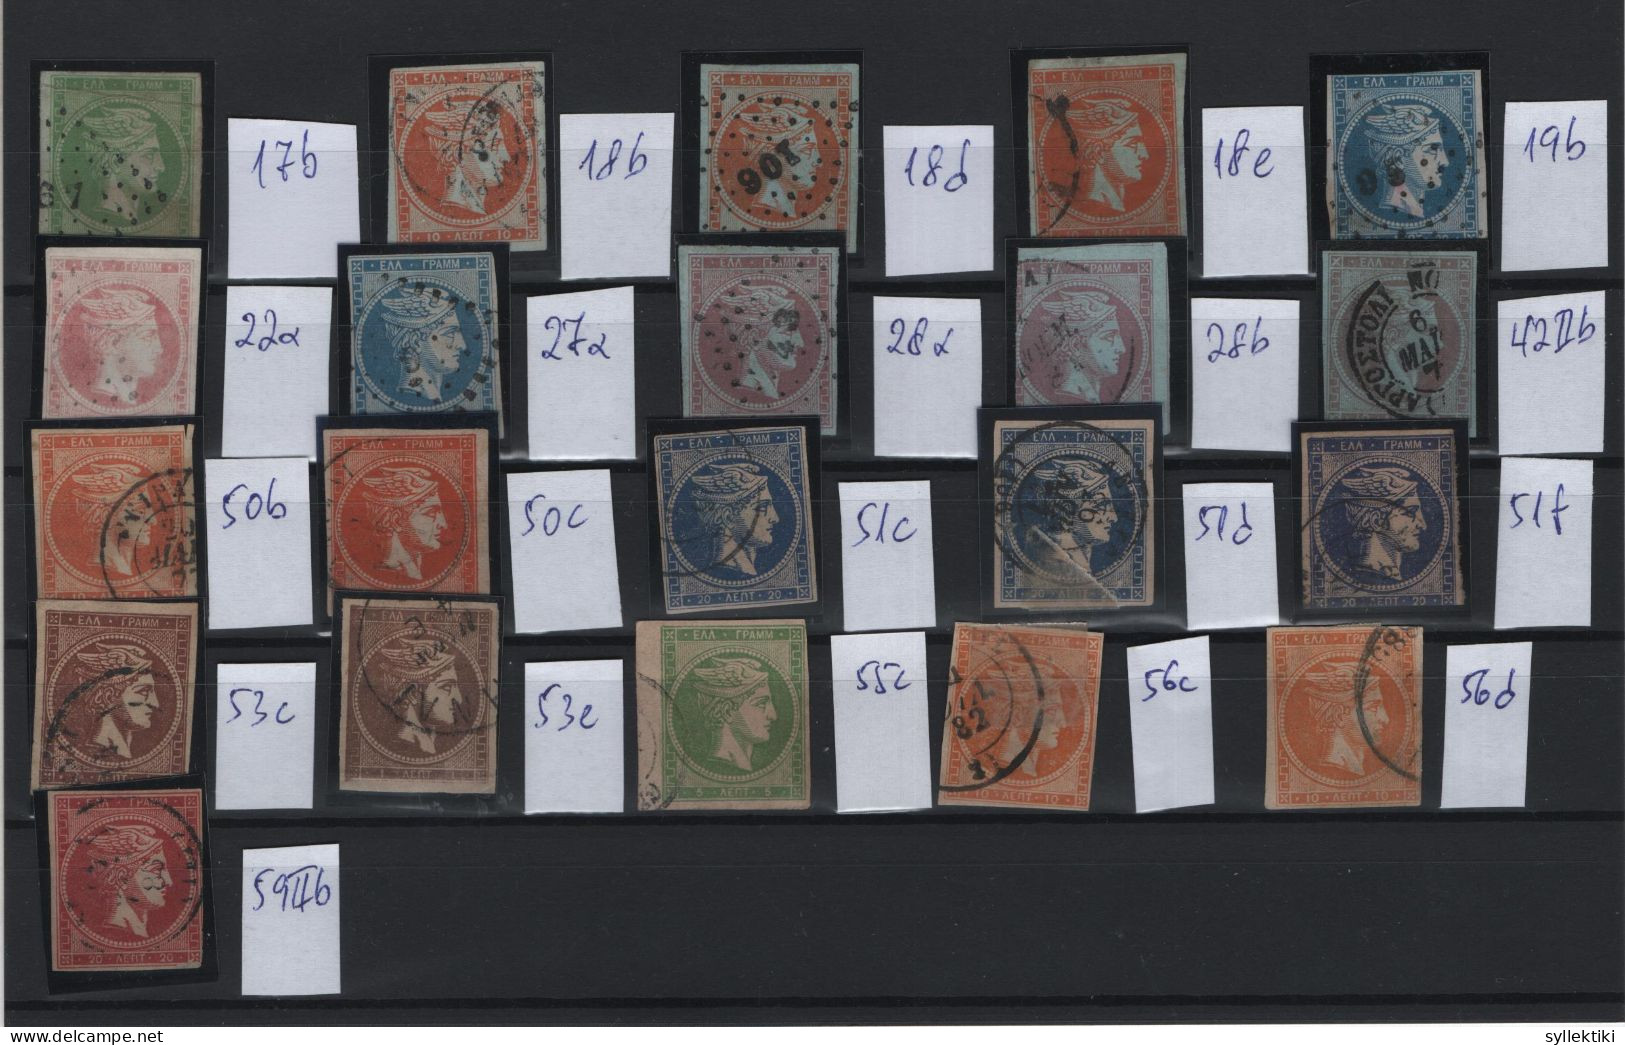 GREECE 1862- 1886 LARGE HERMES HEAD COLLECTION OF 21 DIFFERENT USED STAMPS  HELLAS CATALOGUE VALUE EURO 496.00 - Gebraucht